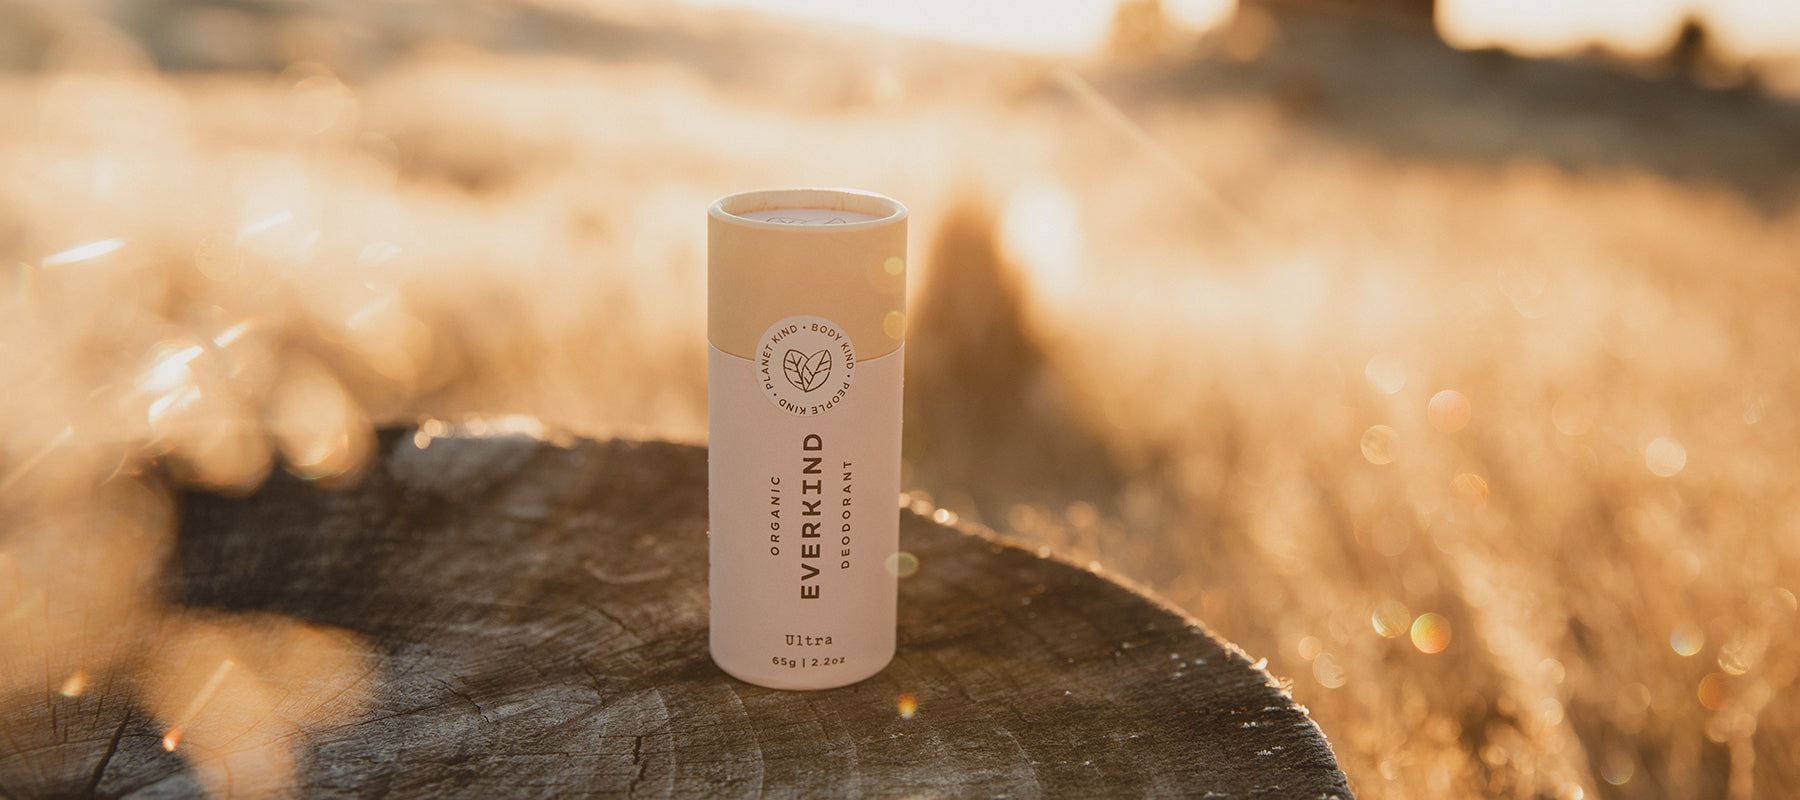 Photo of Everkind Organic Deodorant. We're reimagining luxury to do good for people and the planet.